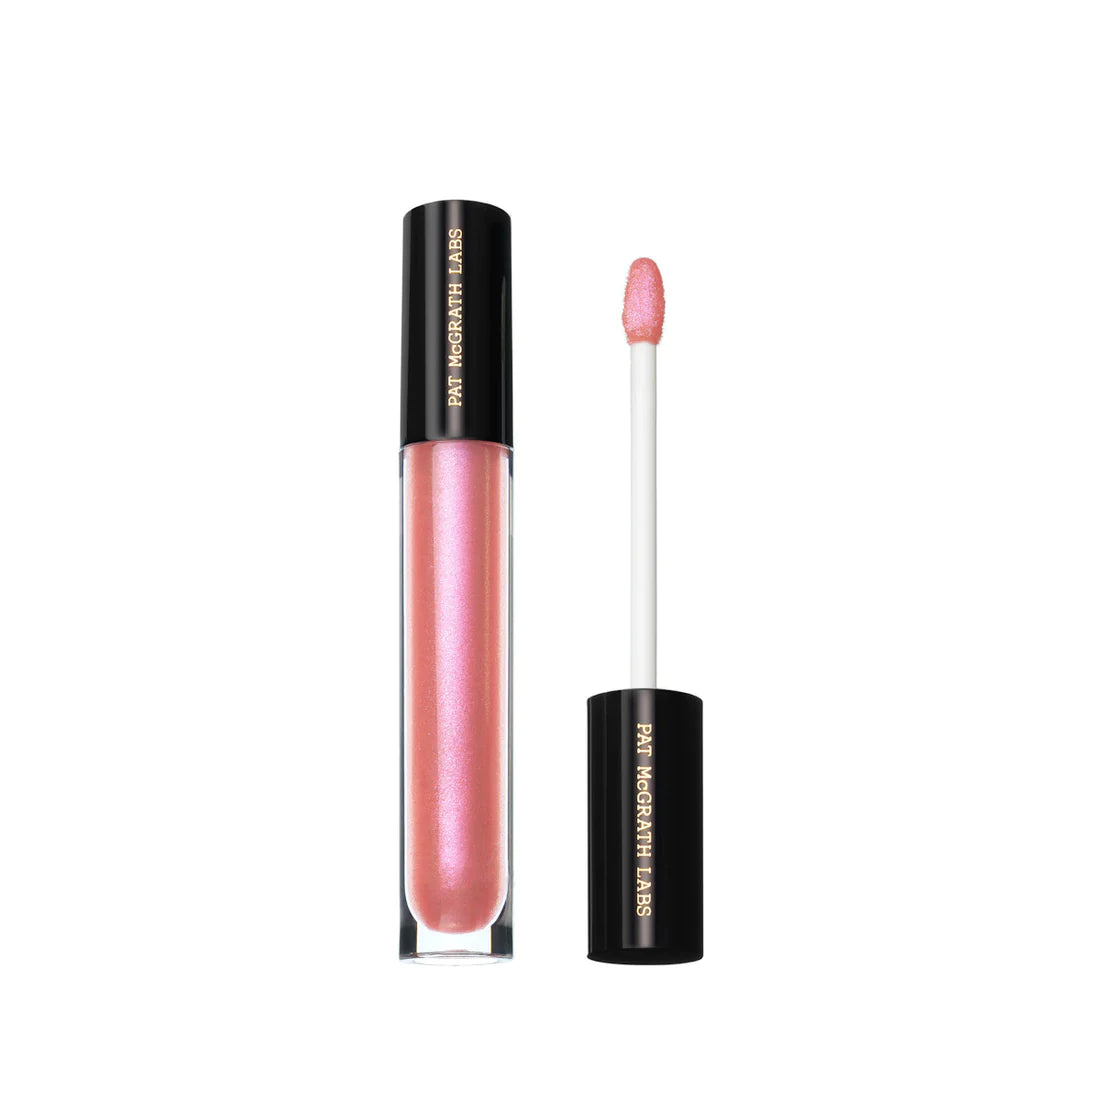 Pat McGrath Lust: Gloss Lip Gloss - Pale Fire Nectar (Coral With Pink Shimmer)